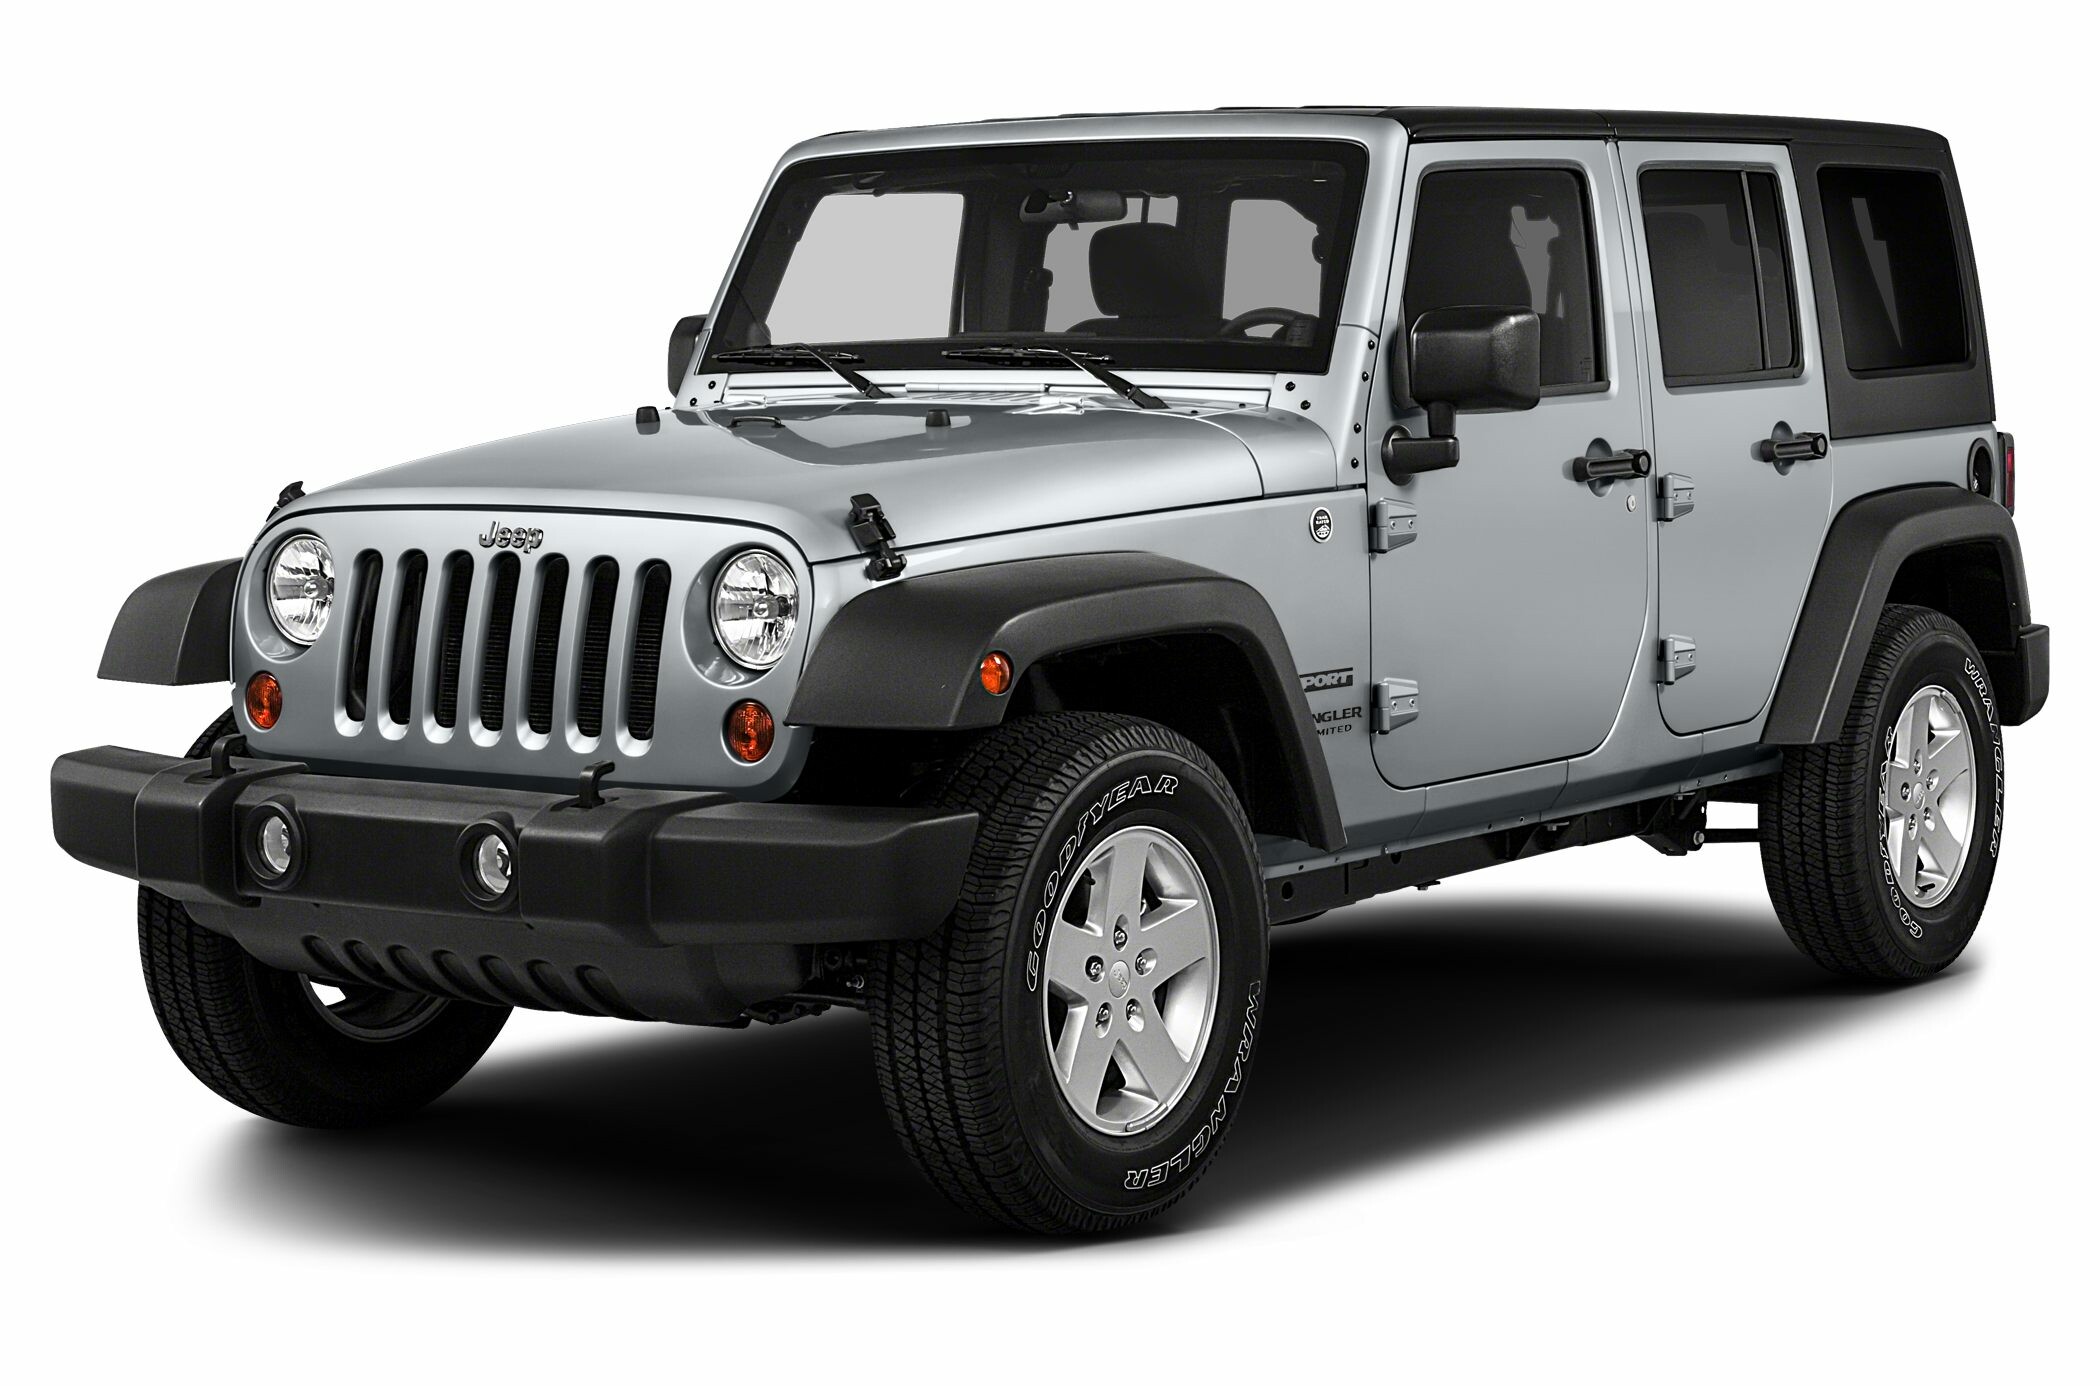 Jeep Wrangler: In 2004 only automatic transmission-equipped “Unlimited” versions were sold. 2100x1390 HD Wallpaper.